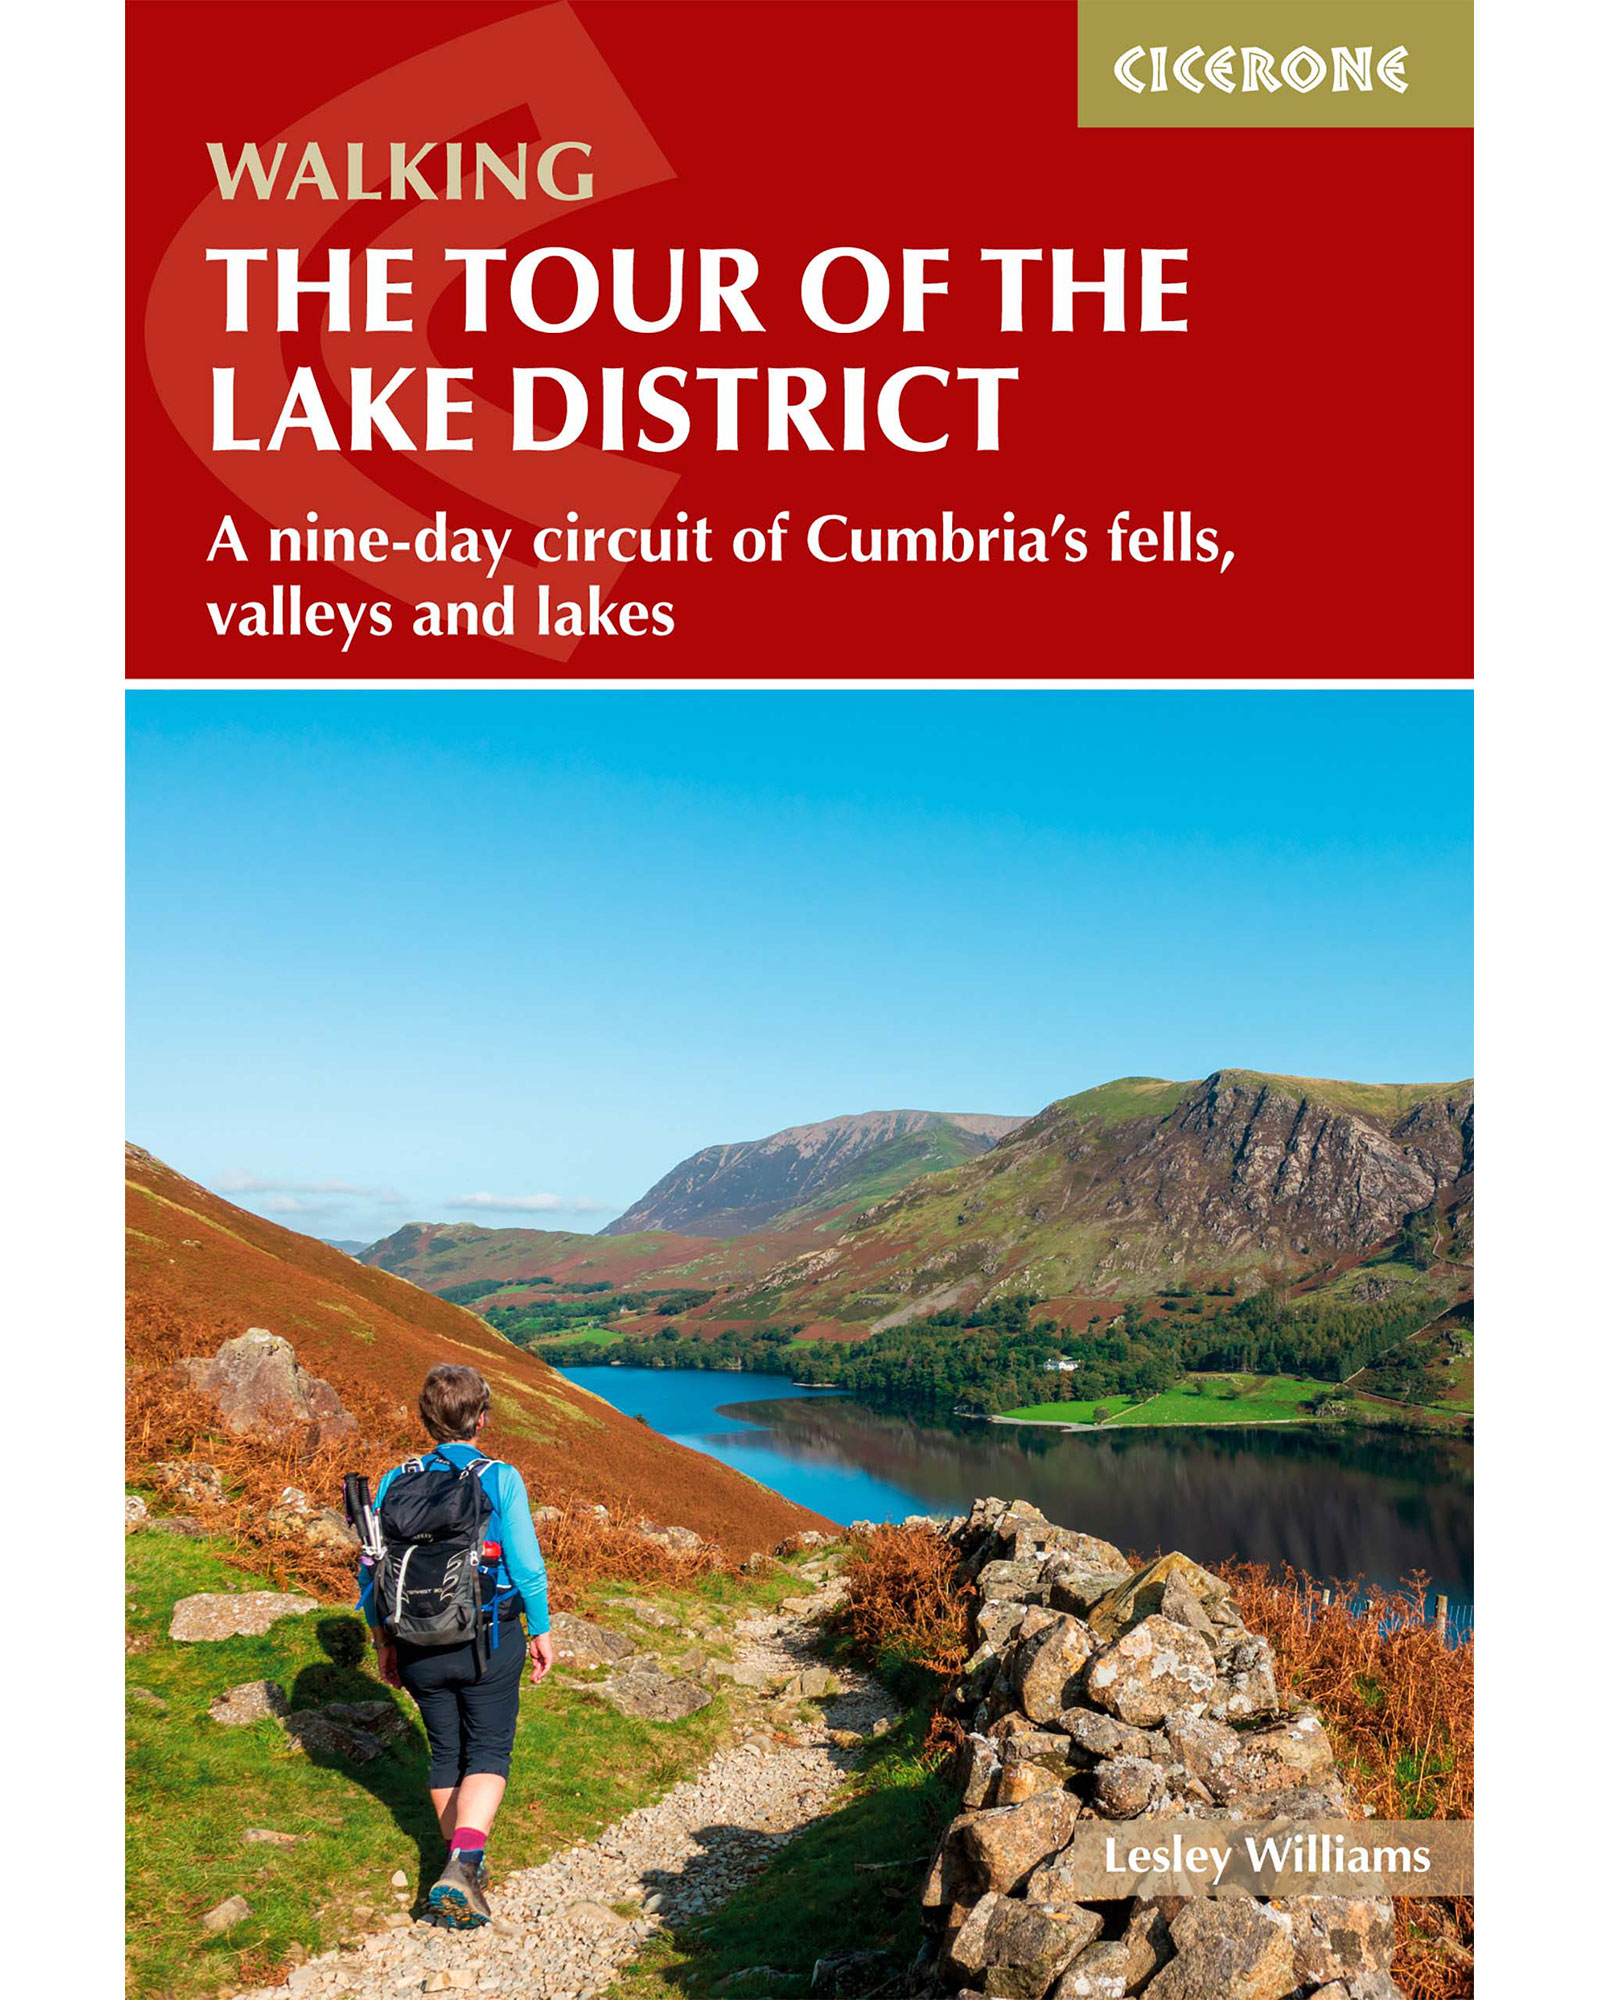 Cicerone Tour Of The Lake District Guide Book